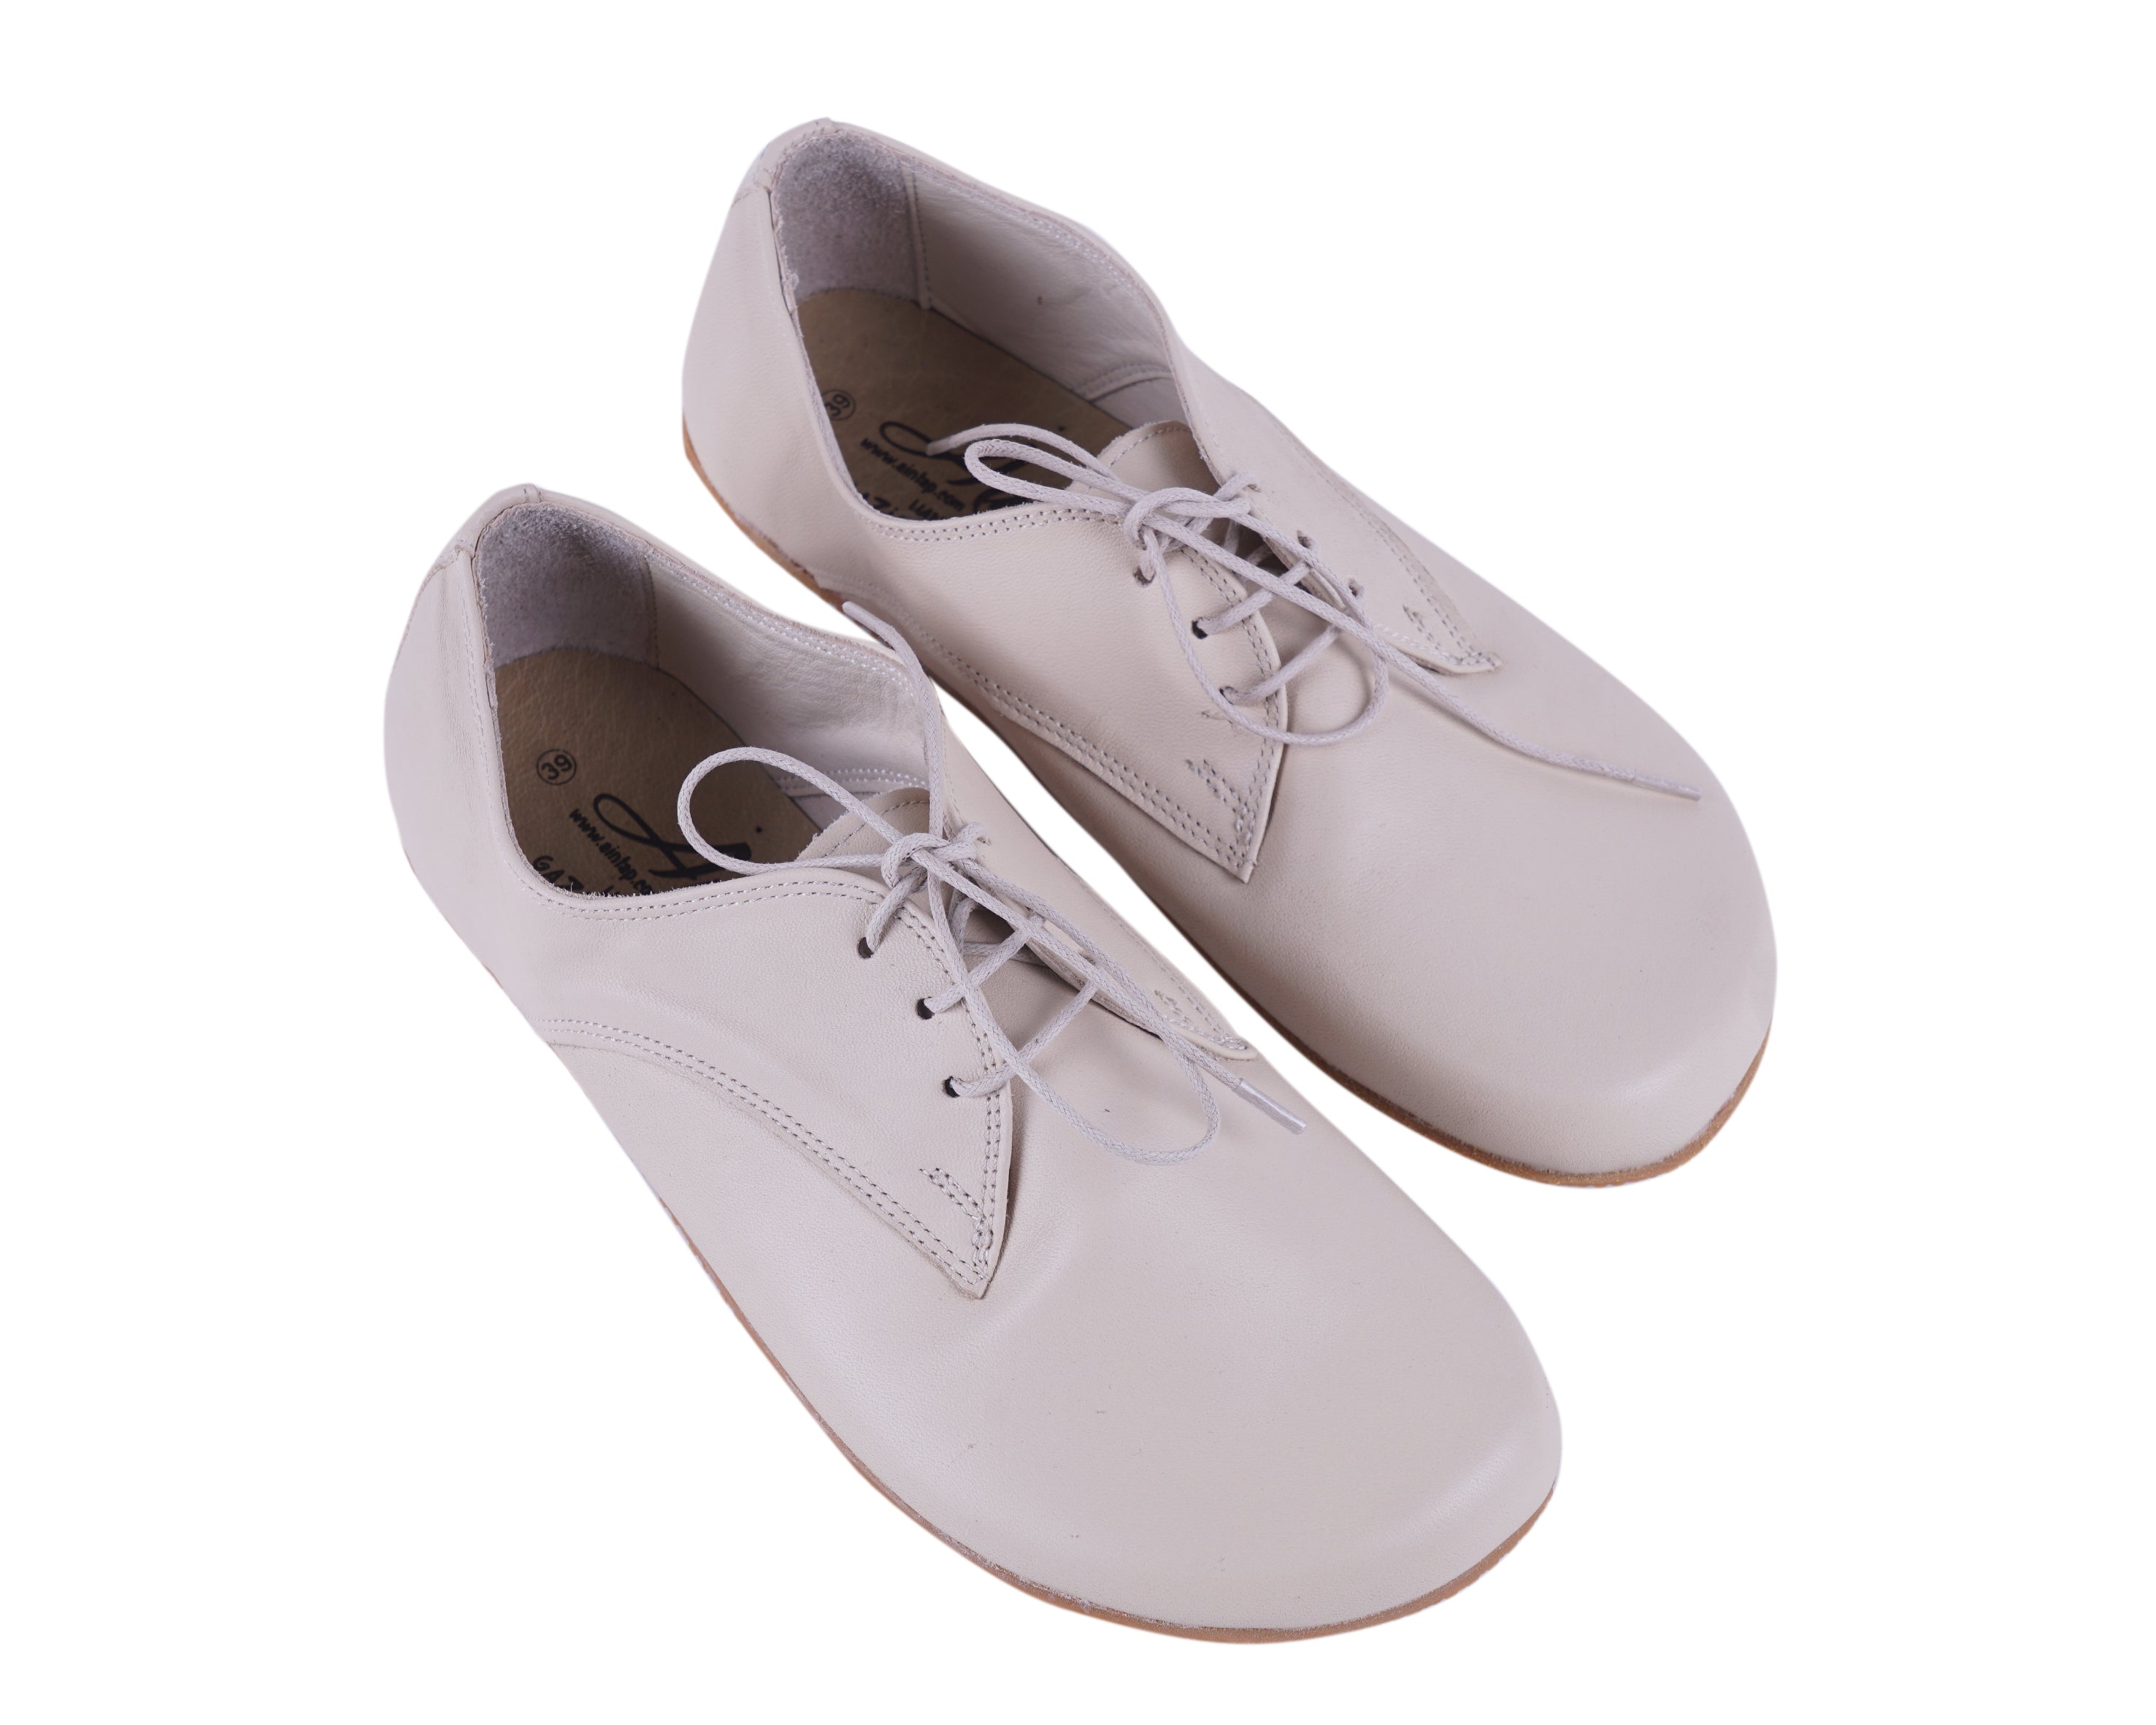 Cream Oxford Wide Barefoot Shoes Smooth Leather Handmade 4mm Rubber Outsole